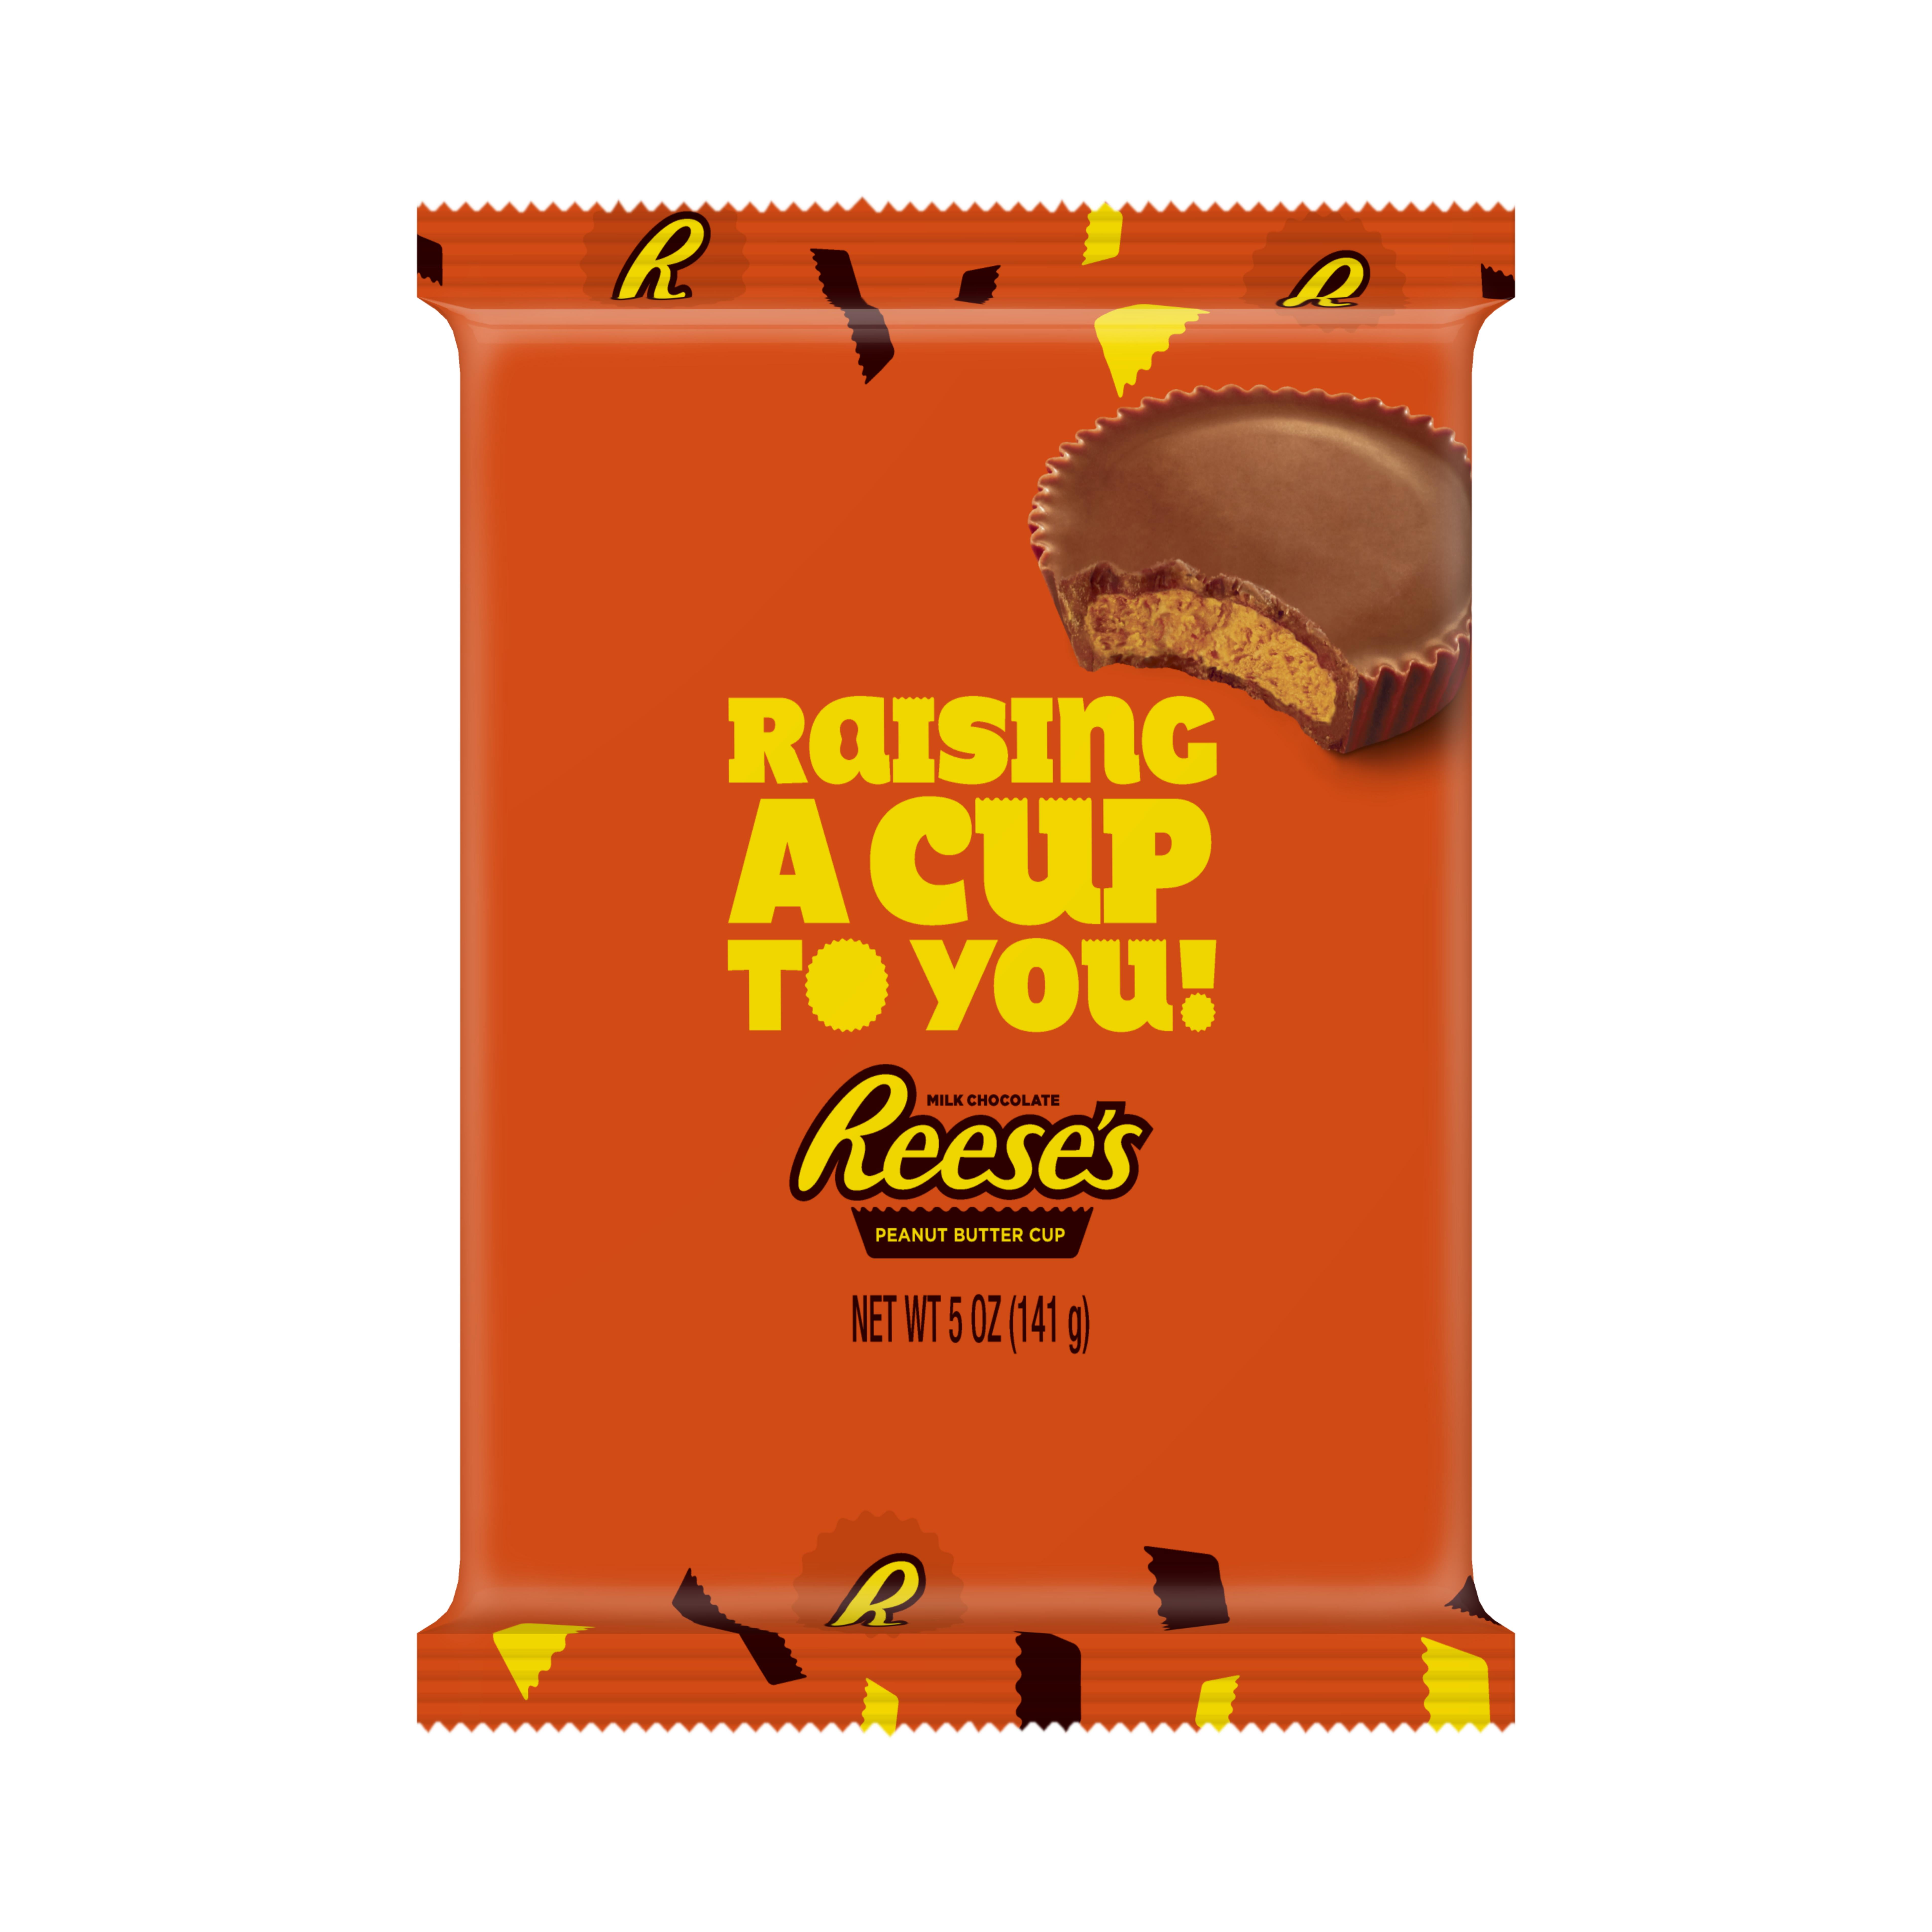 REESE'S Stuff Your Cup, peanut butter, peanut butter cup, Just a whole  pound of Reese's Peanut Butter Cup heaven. 😍 What will go inside yours??  Get the scoop